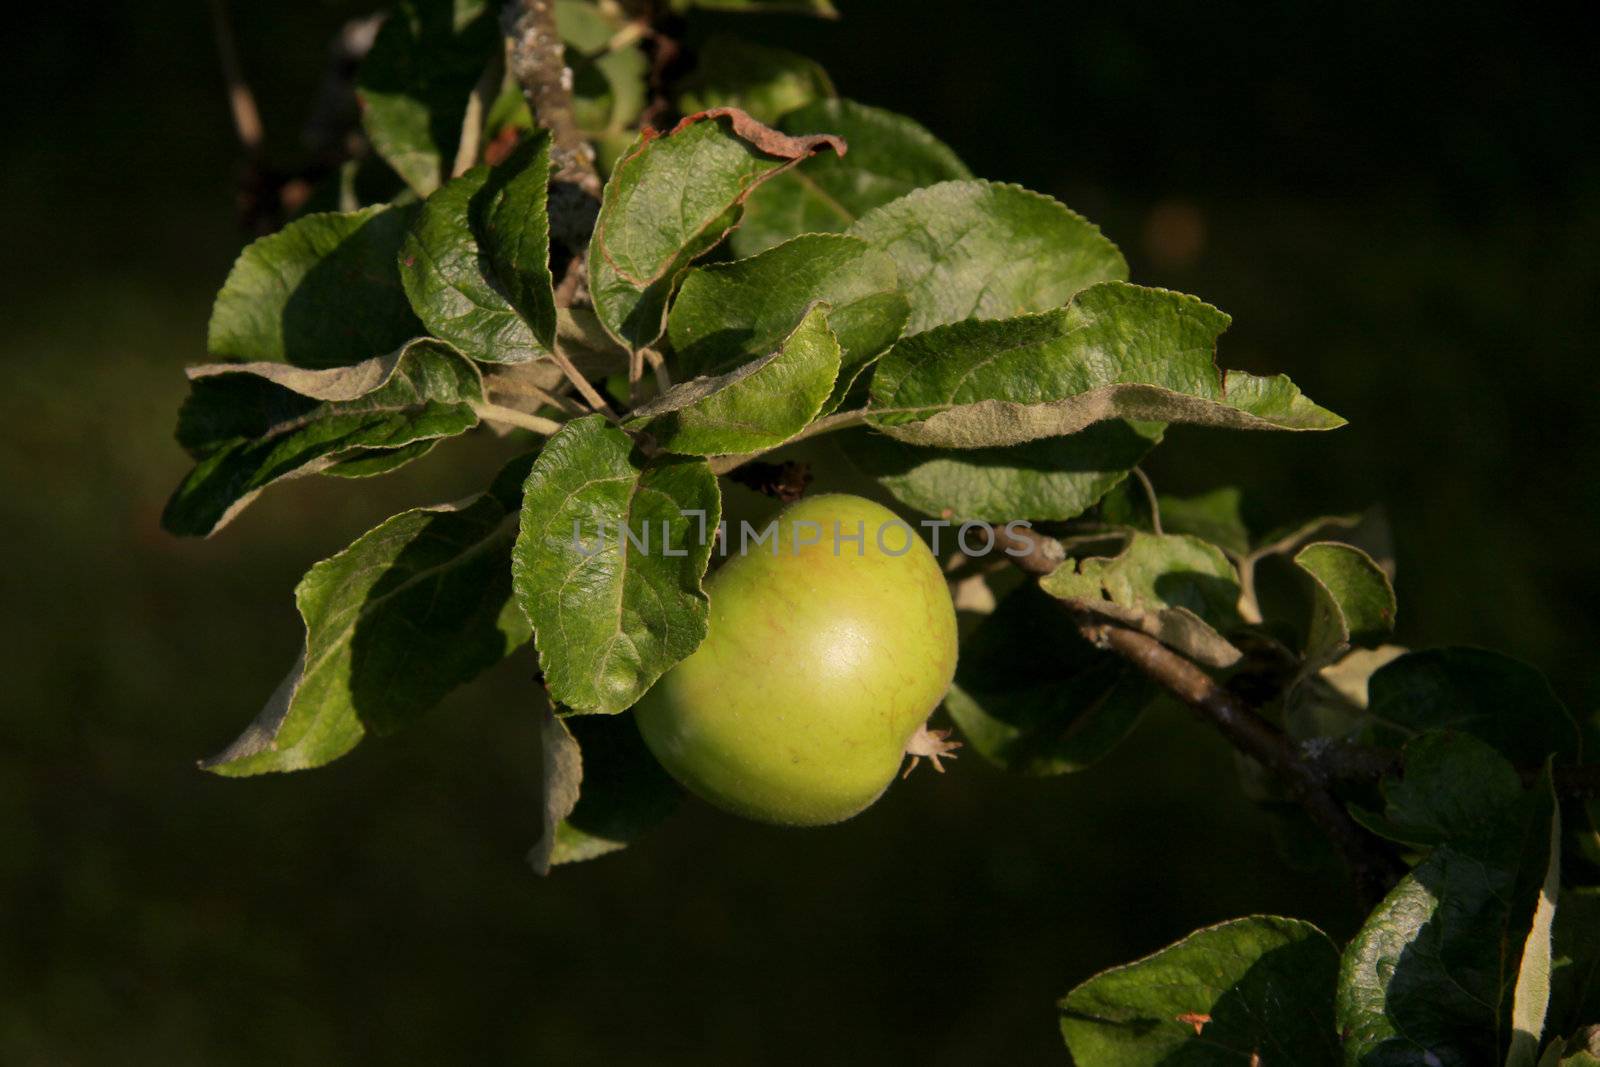 A branch of an apple tree with a green apple